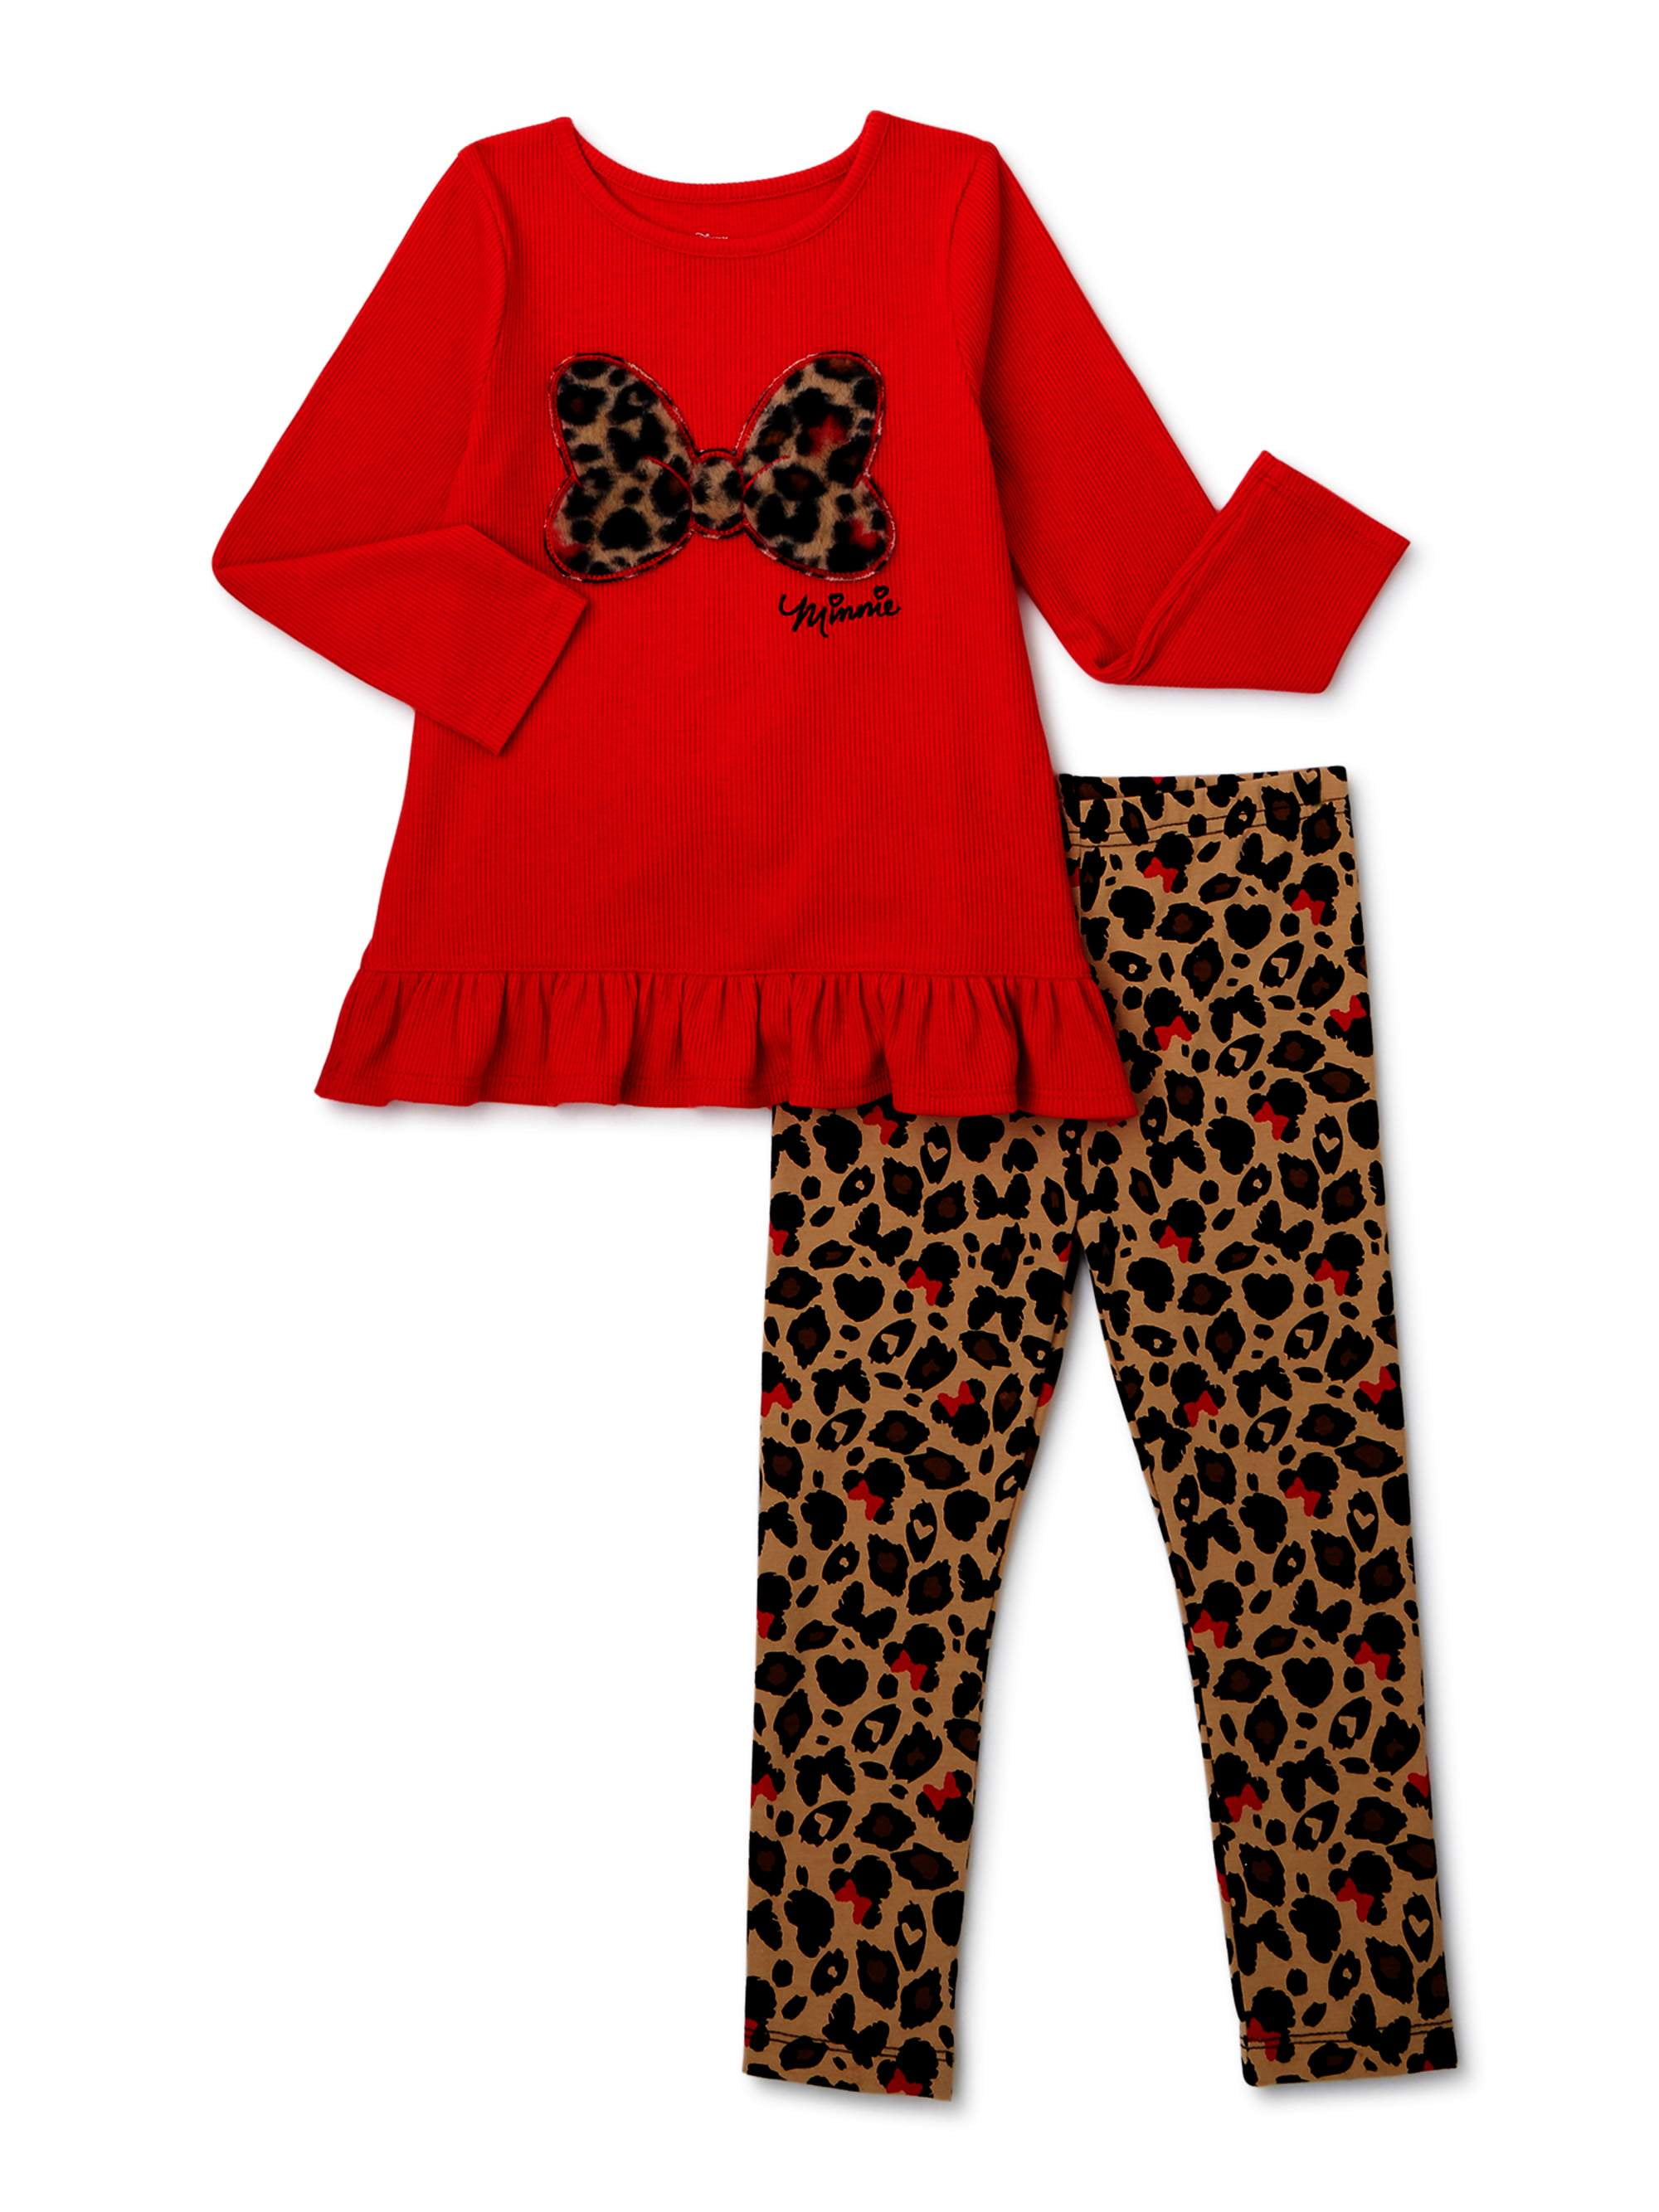 Minnie Mouse Baby Toddler Girl Ruffle Trim Top & Animal Print Leggings, 2pc  outfit set 